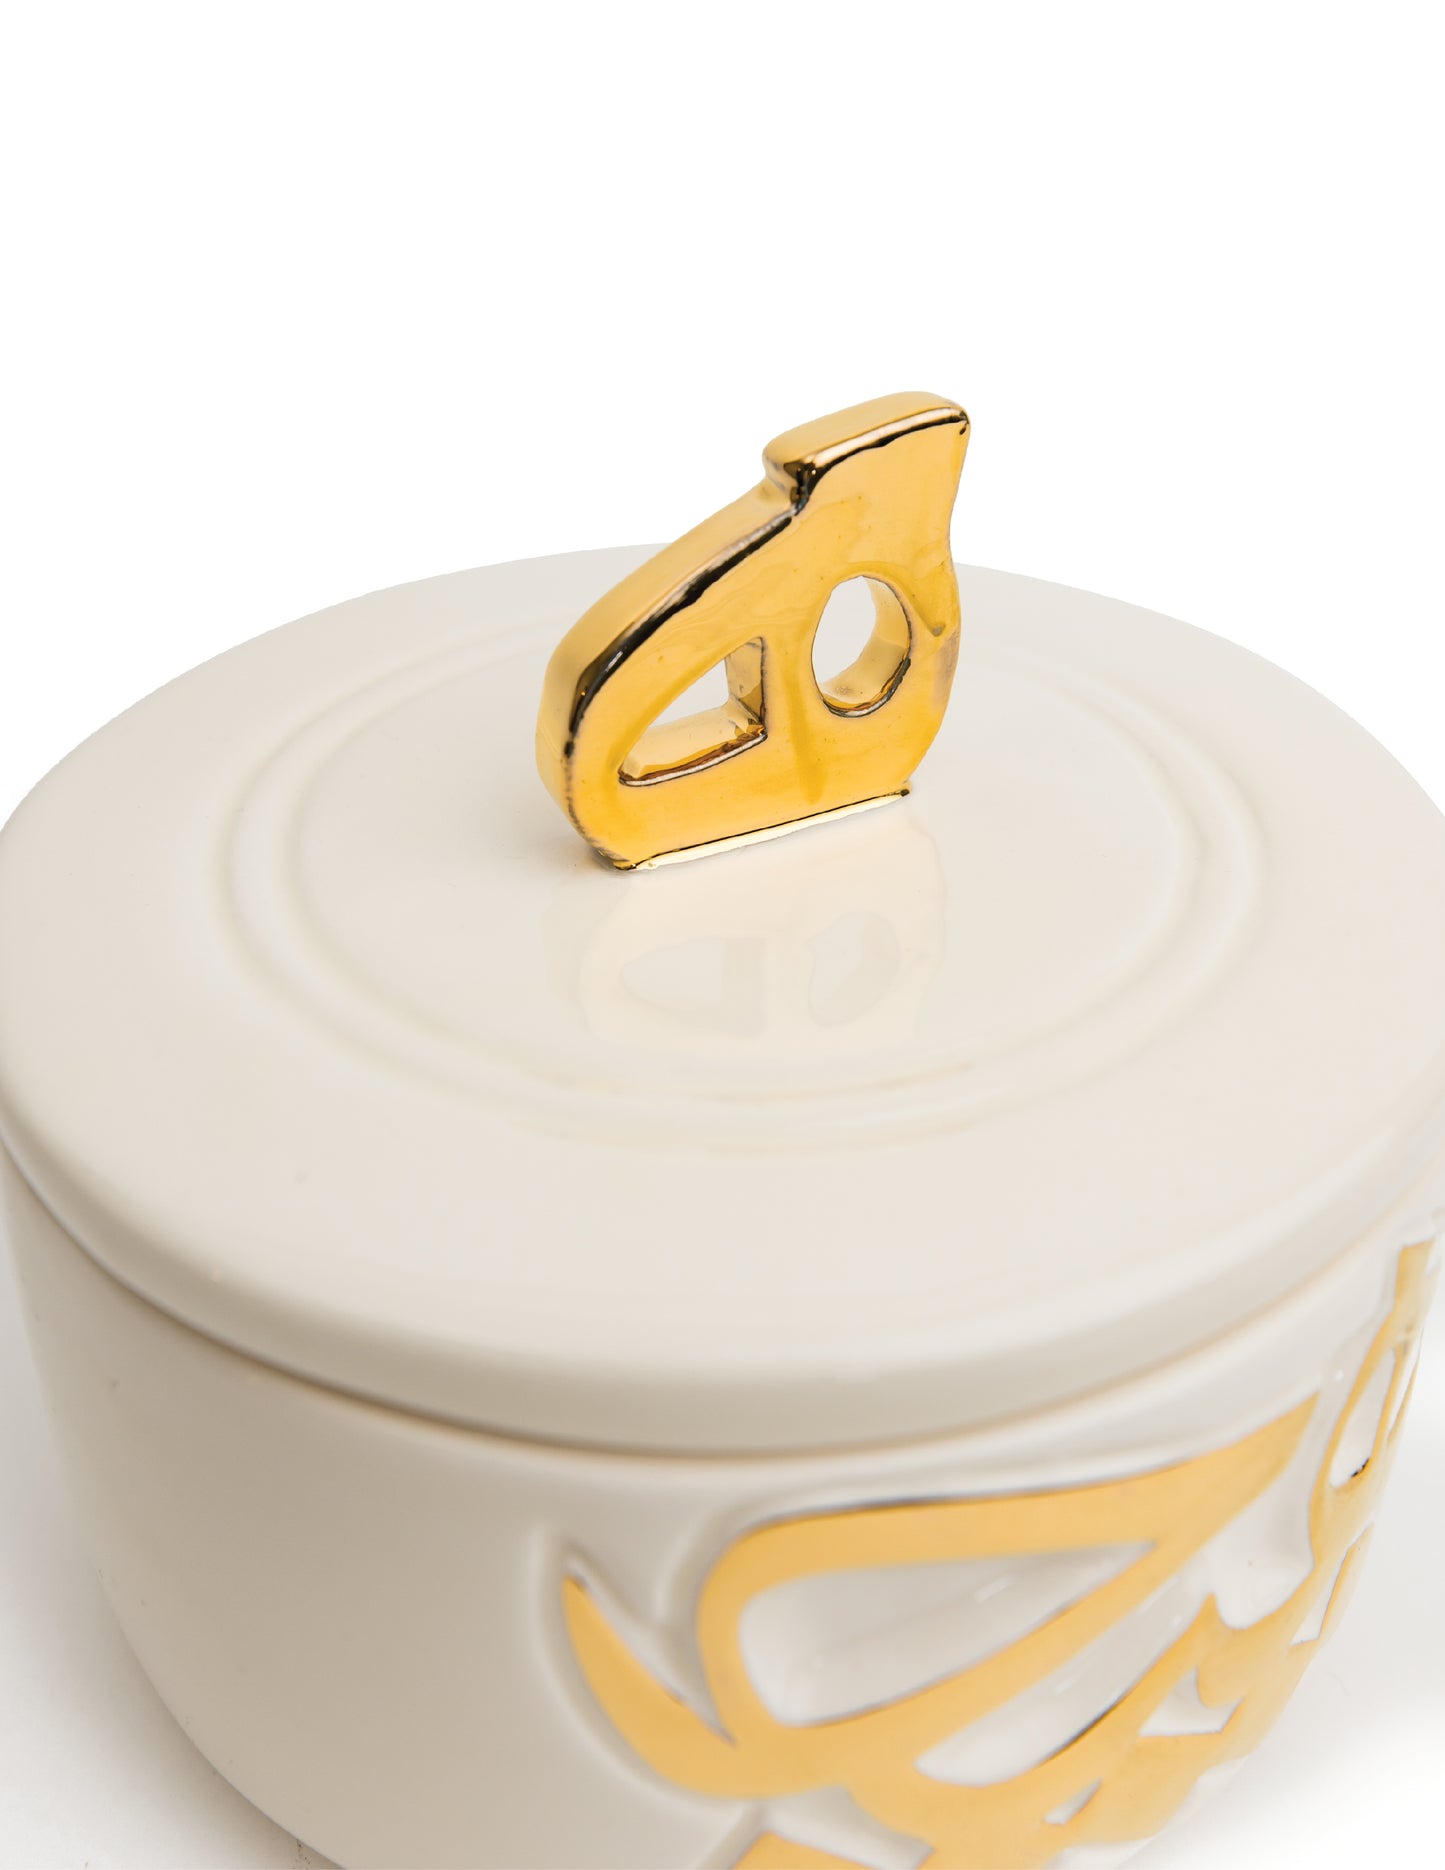 White and Gold Heech Canister | Chocolate Bowl